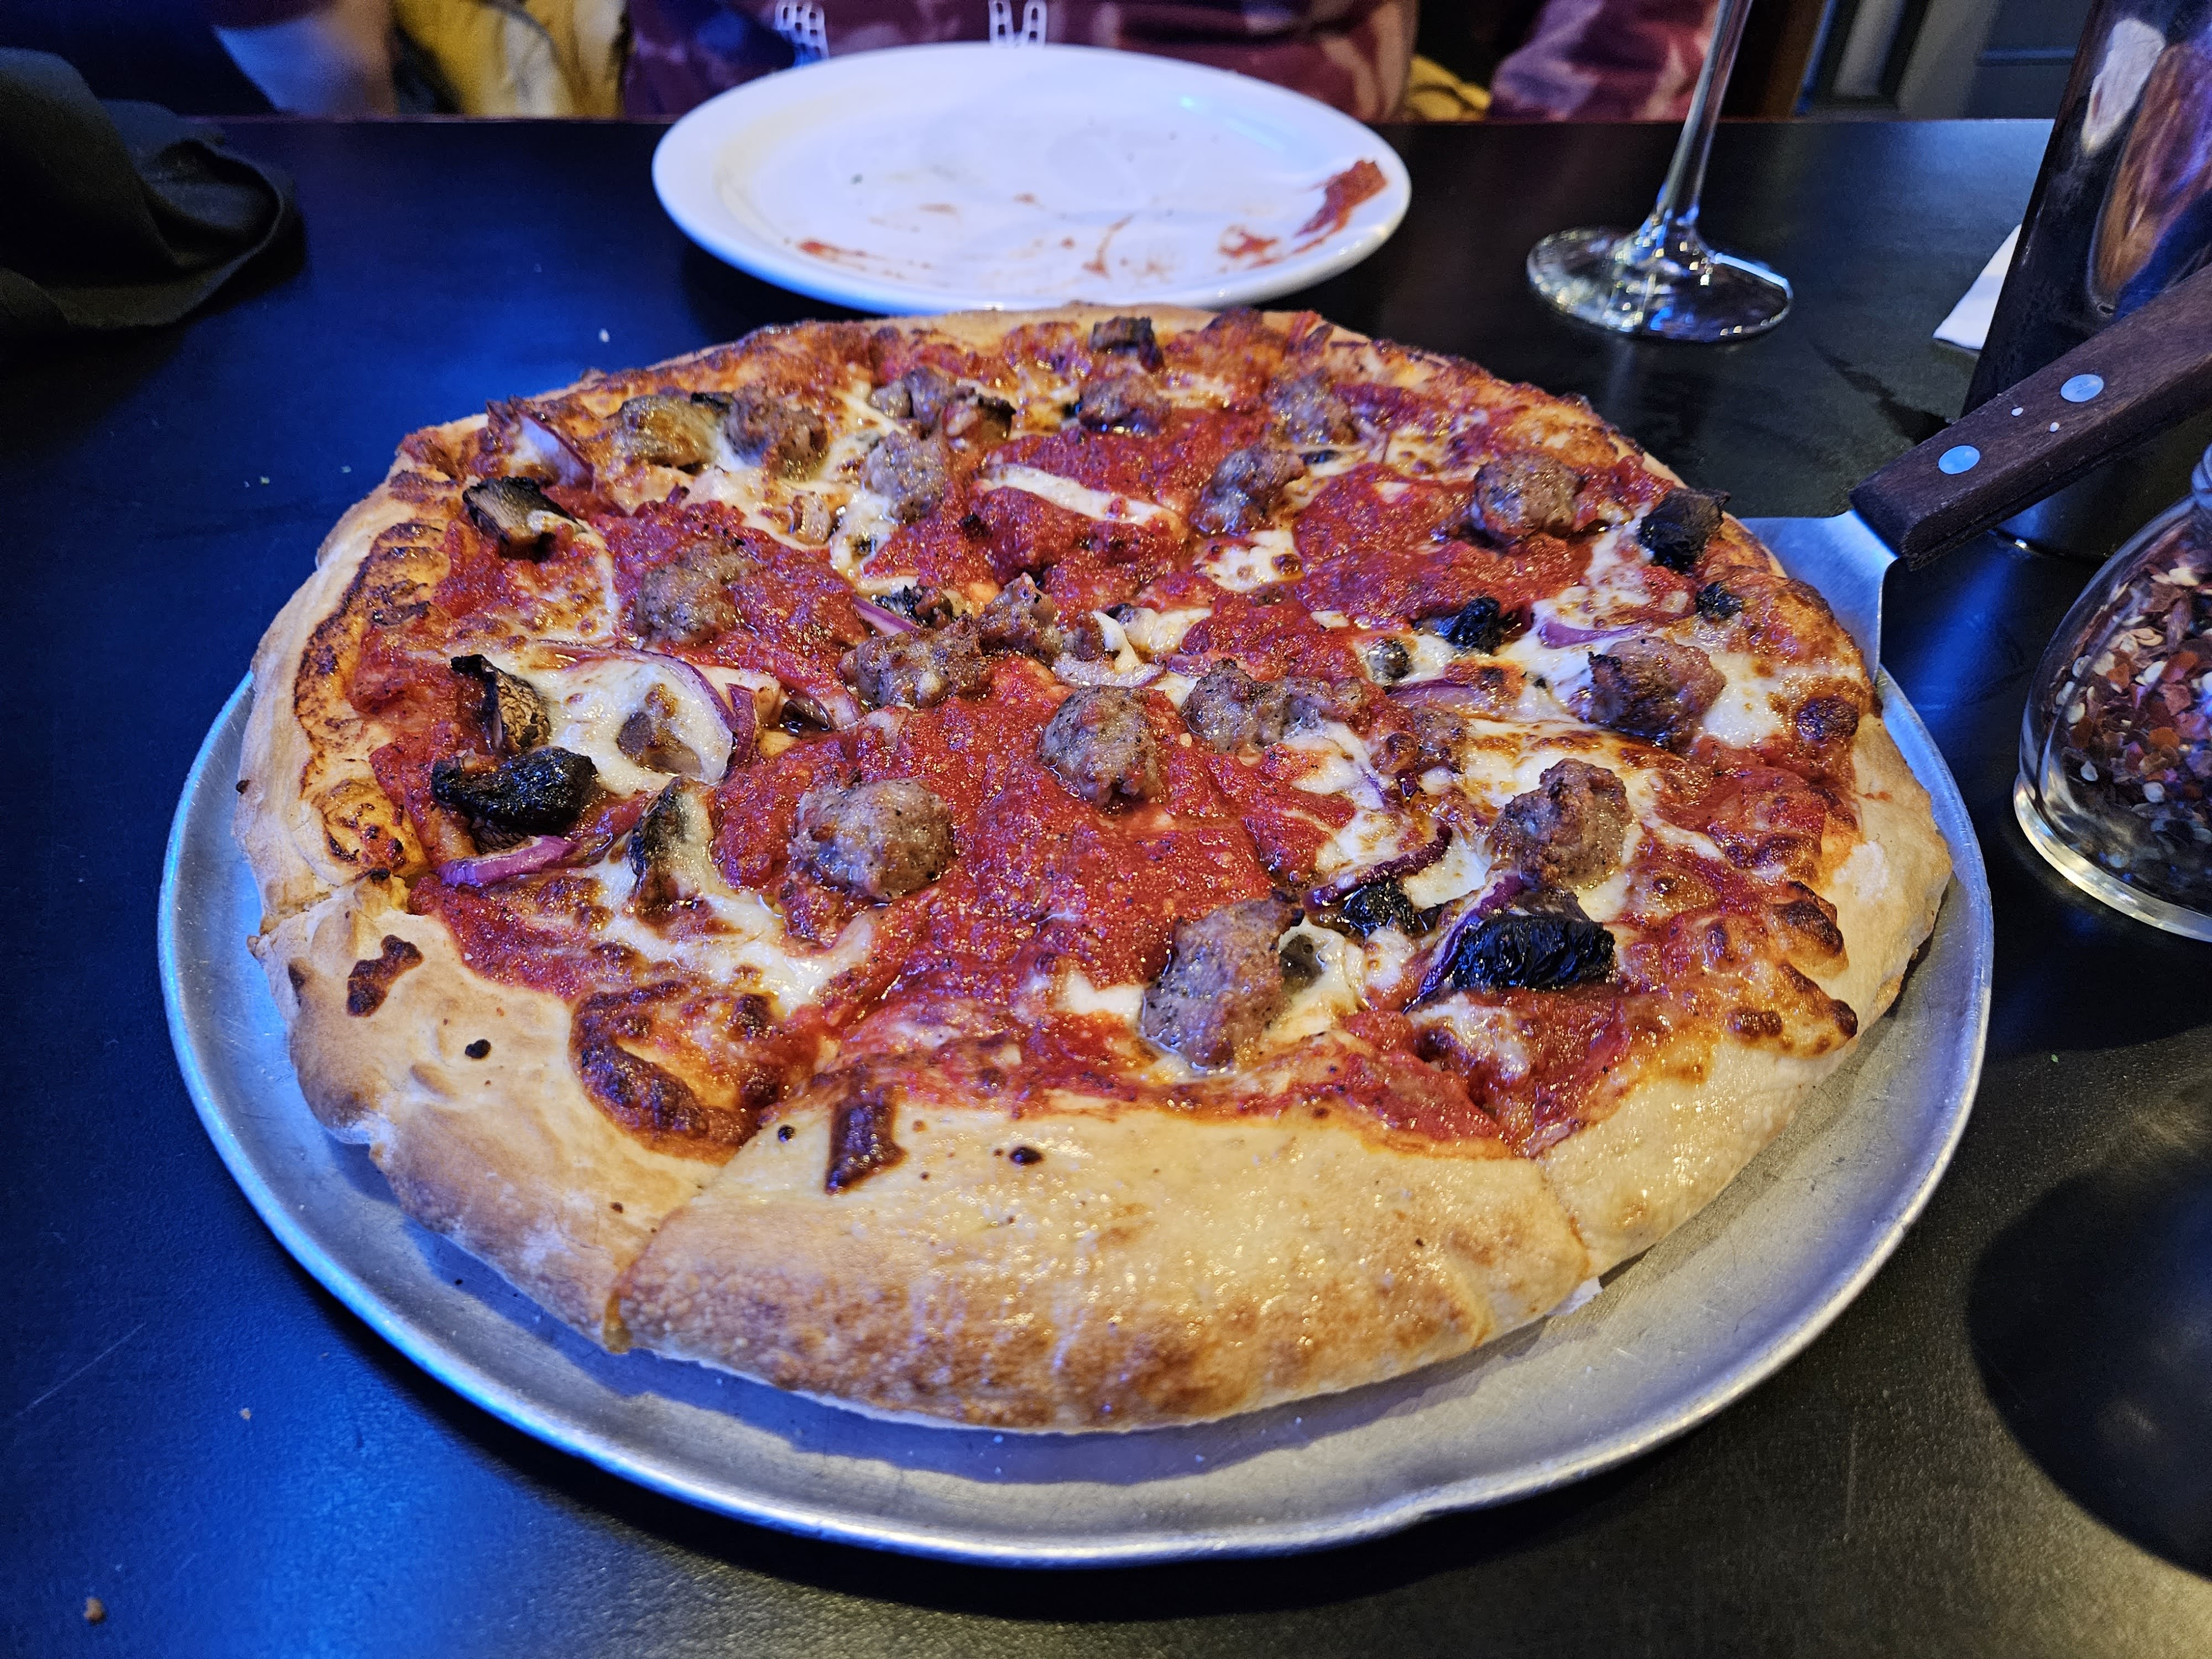 Samsung Galaxy S23 Plus photo of a pizza.